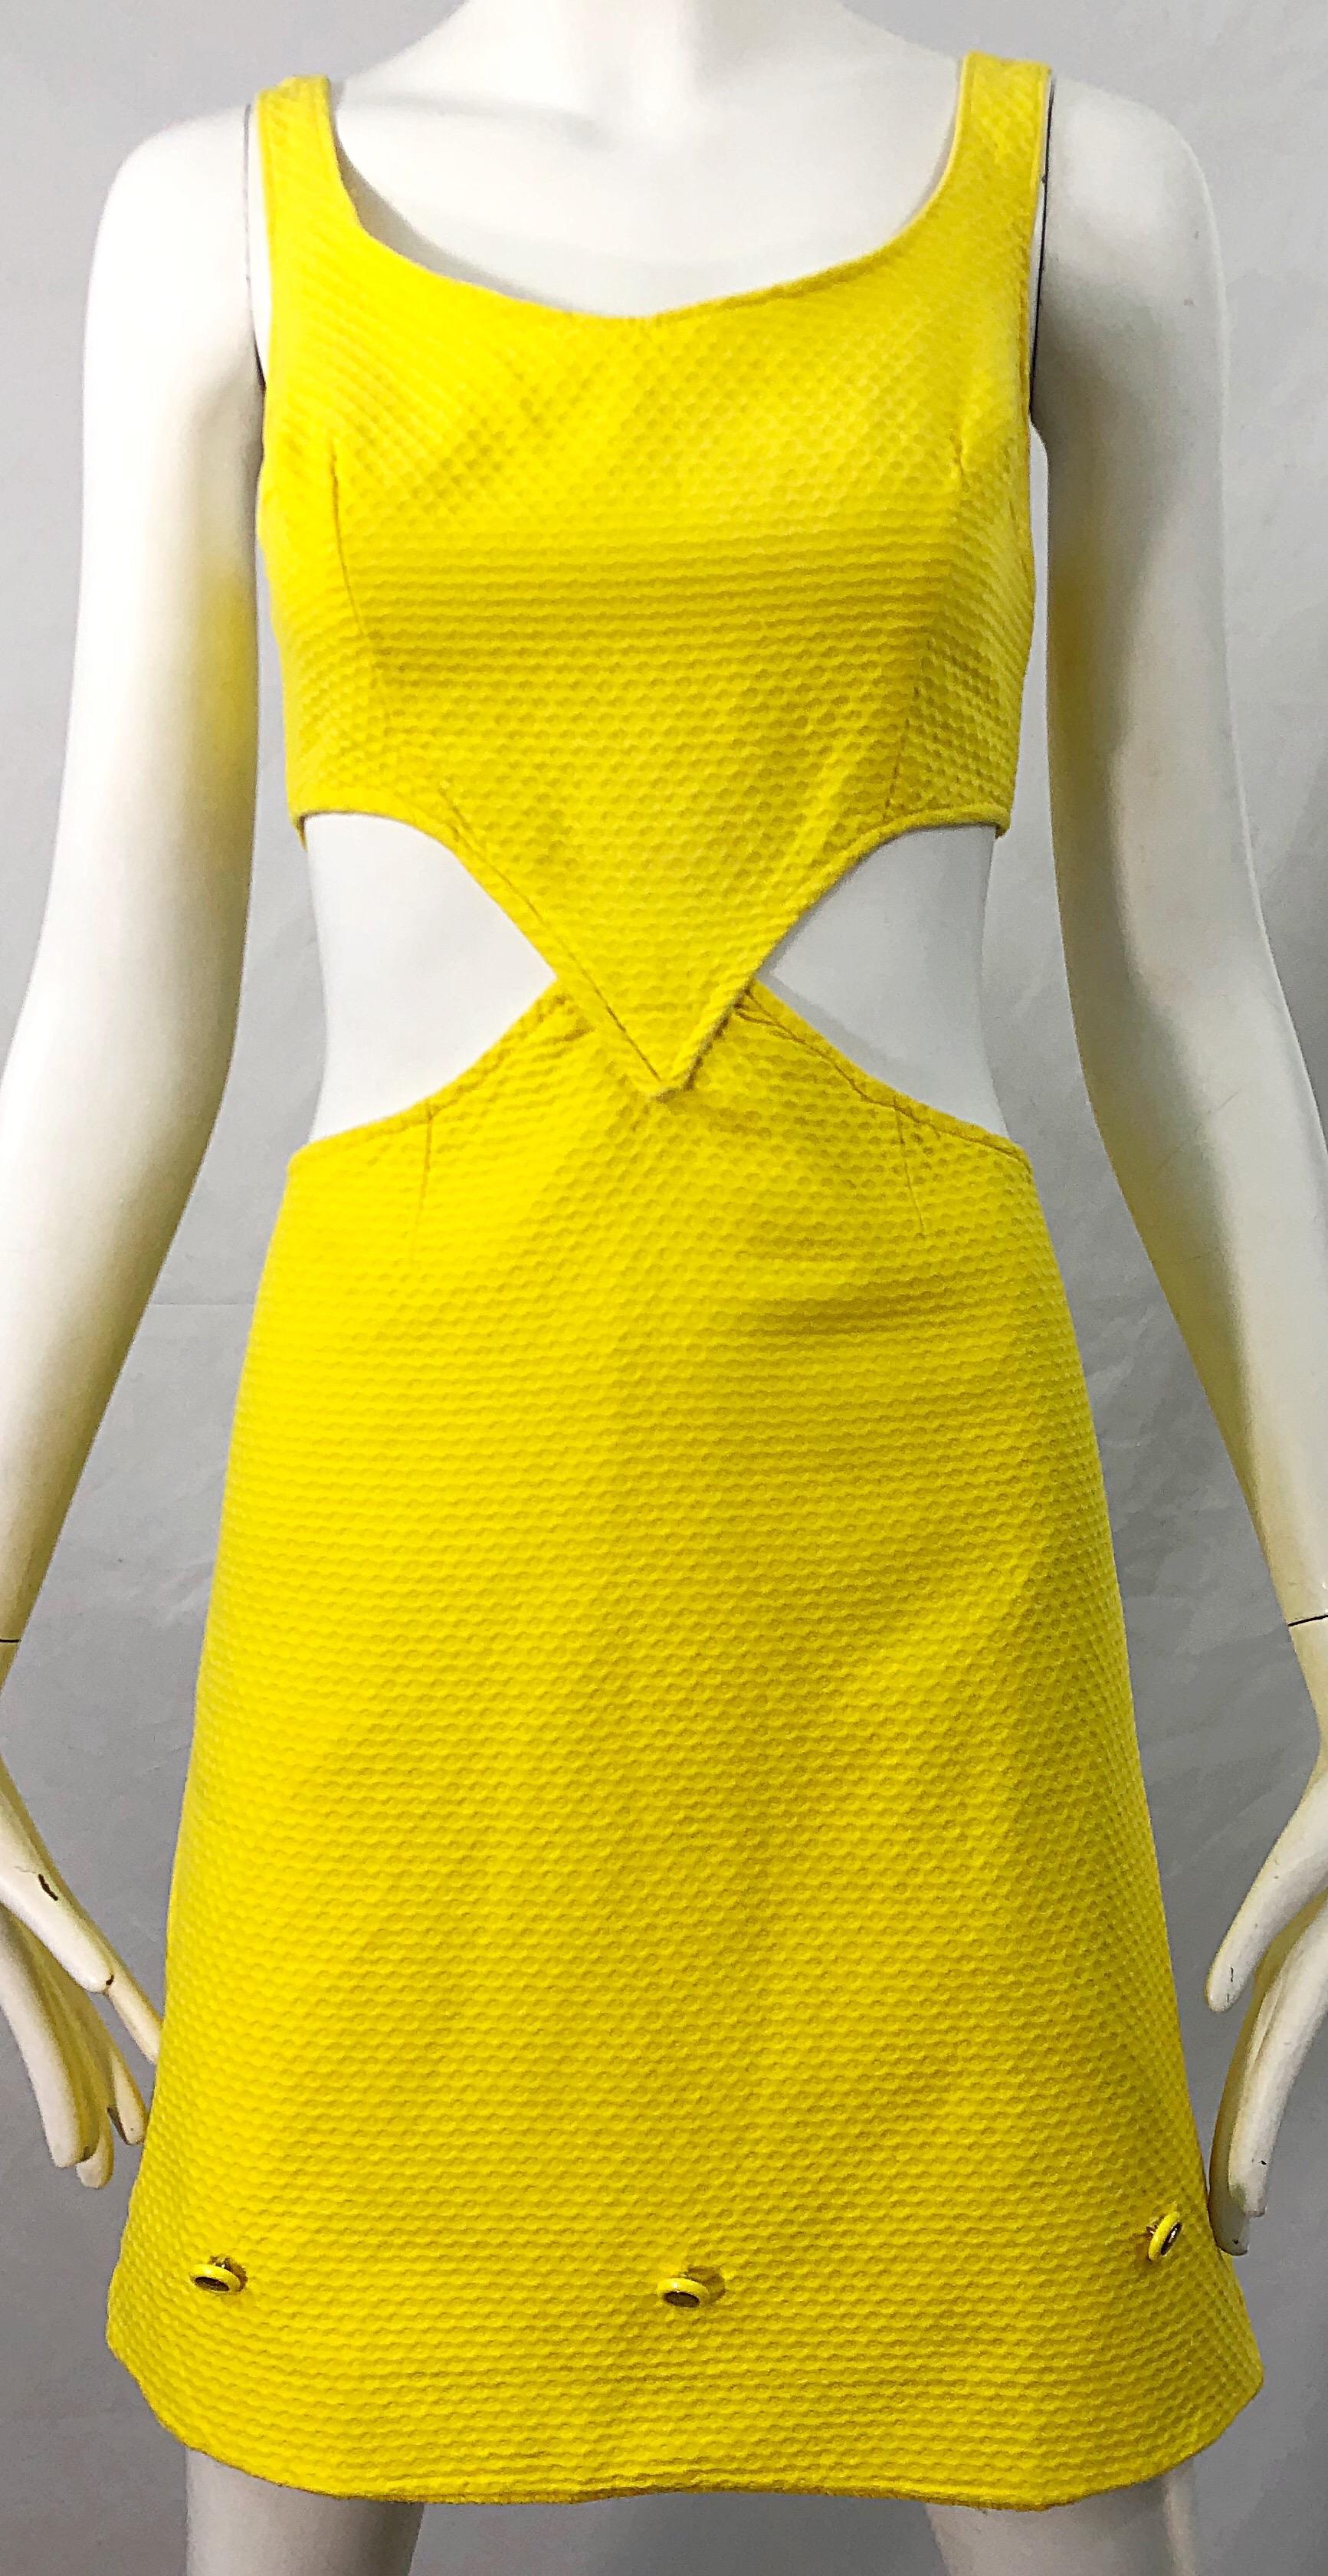 Women's 1960s Canary Yellow Cut - Out Honeycomb Cotton Vintage 60s A Line Dress